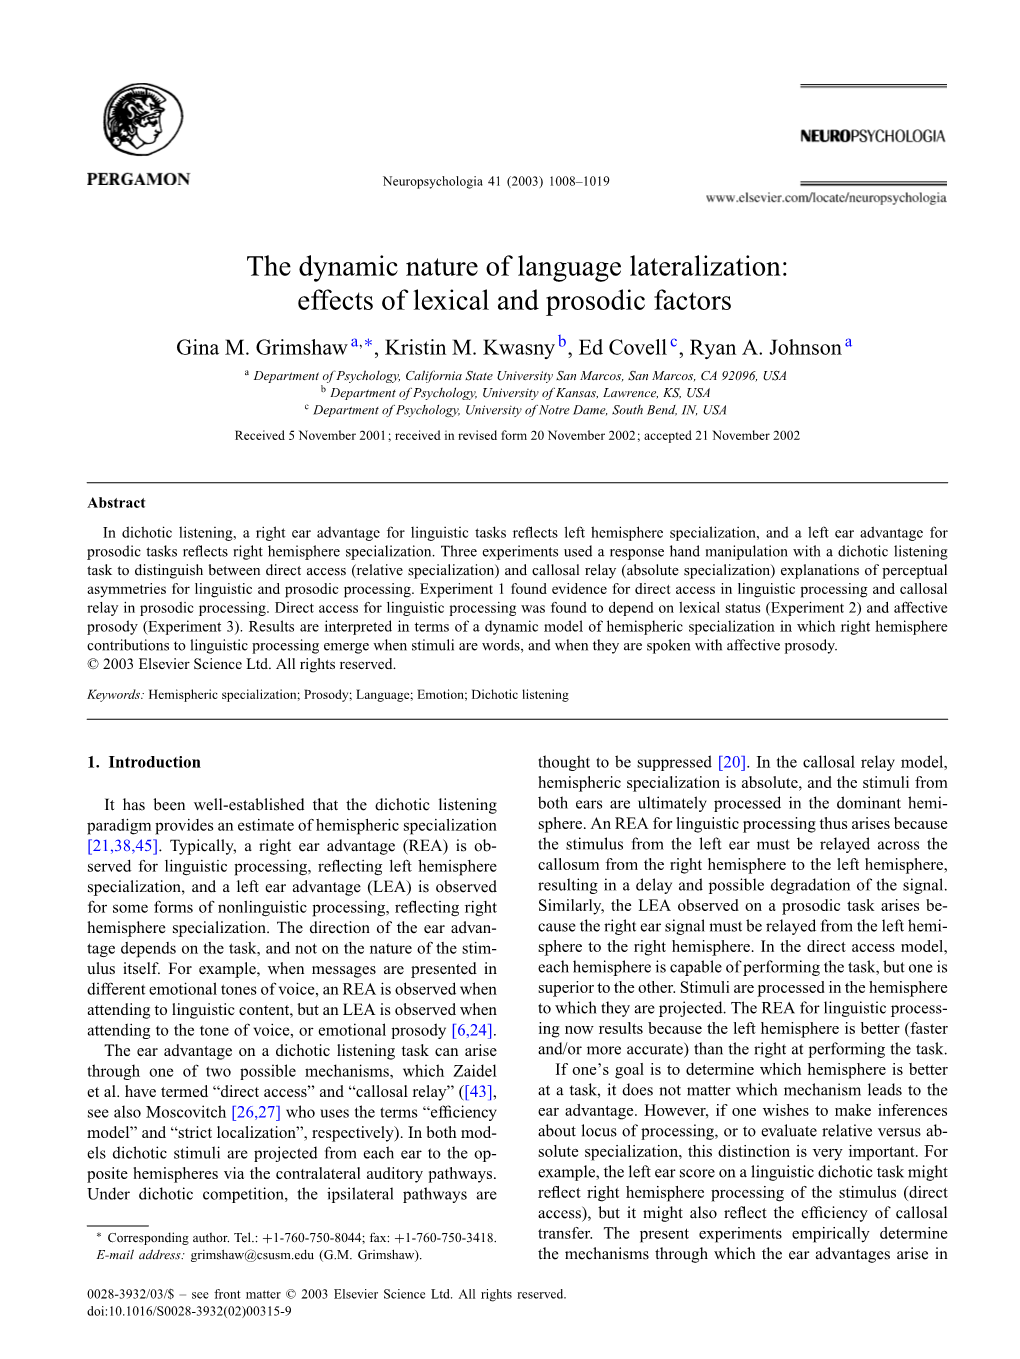 The Dynamic Nature of Language Lateralization: Effects of Lexical and Prosodic Factors Gina M